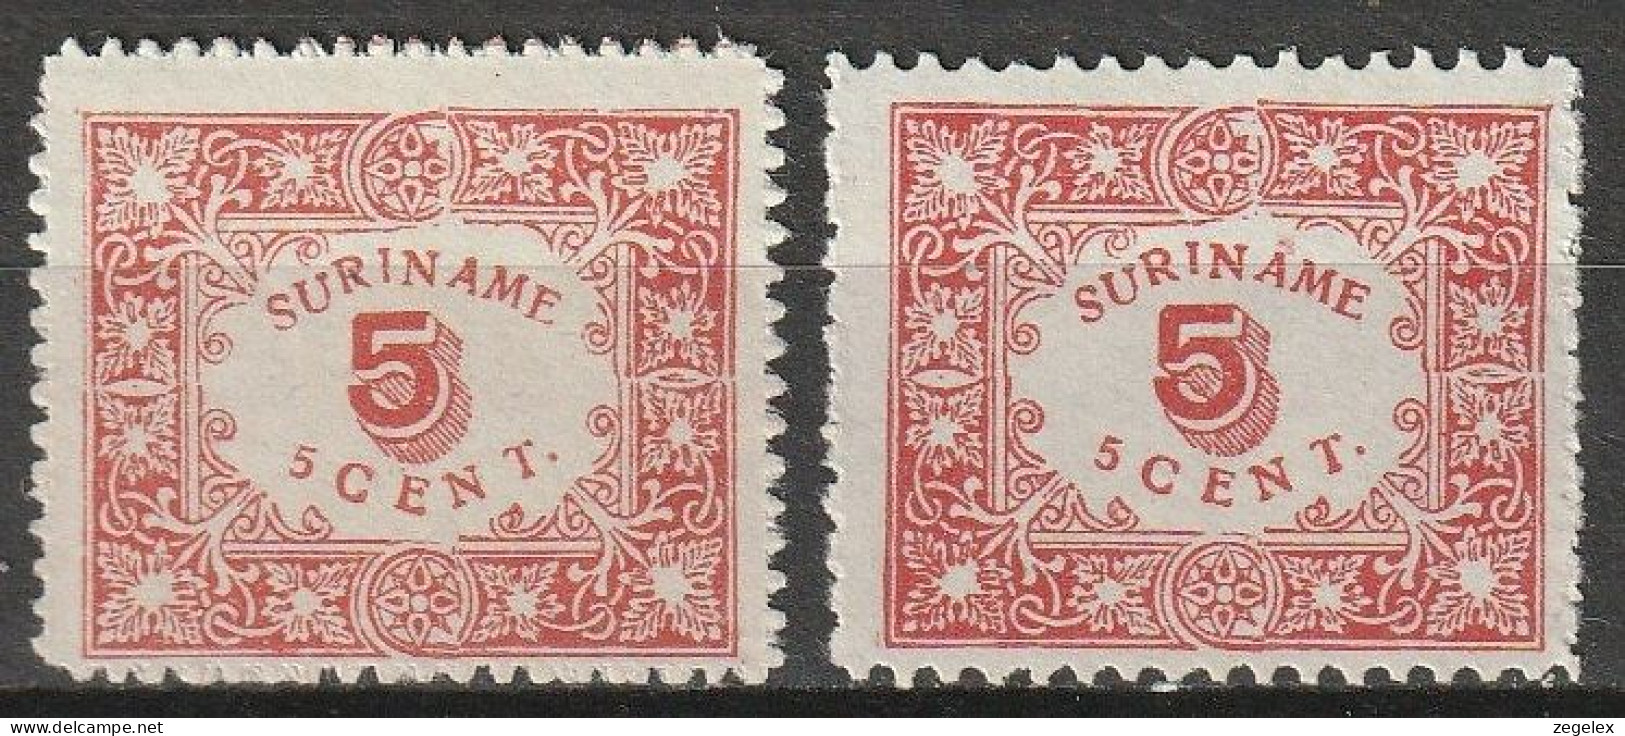 Suriname 1909 Hulpuitgifte 5 Ct NVPH 58 And 59 MNG Mint No Gum (as Issued), Ongestempeld Zonder Gom - Surinam ... - 1975